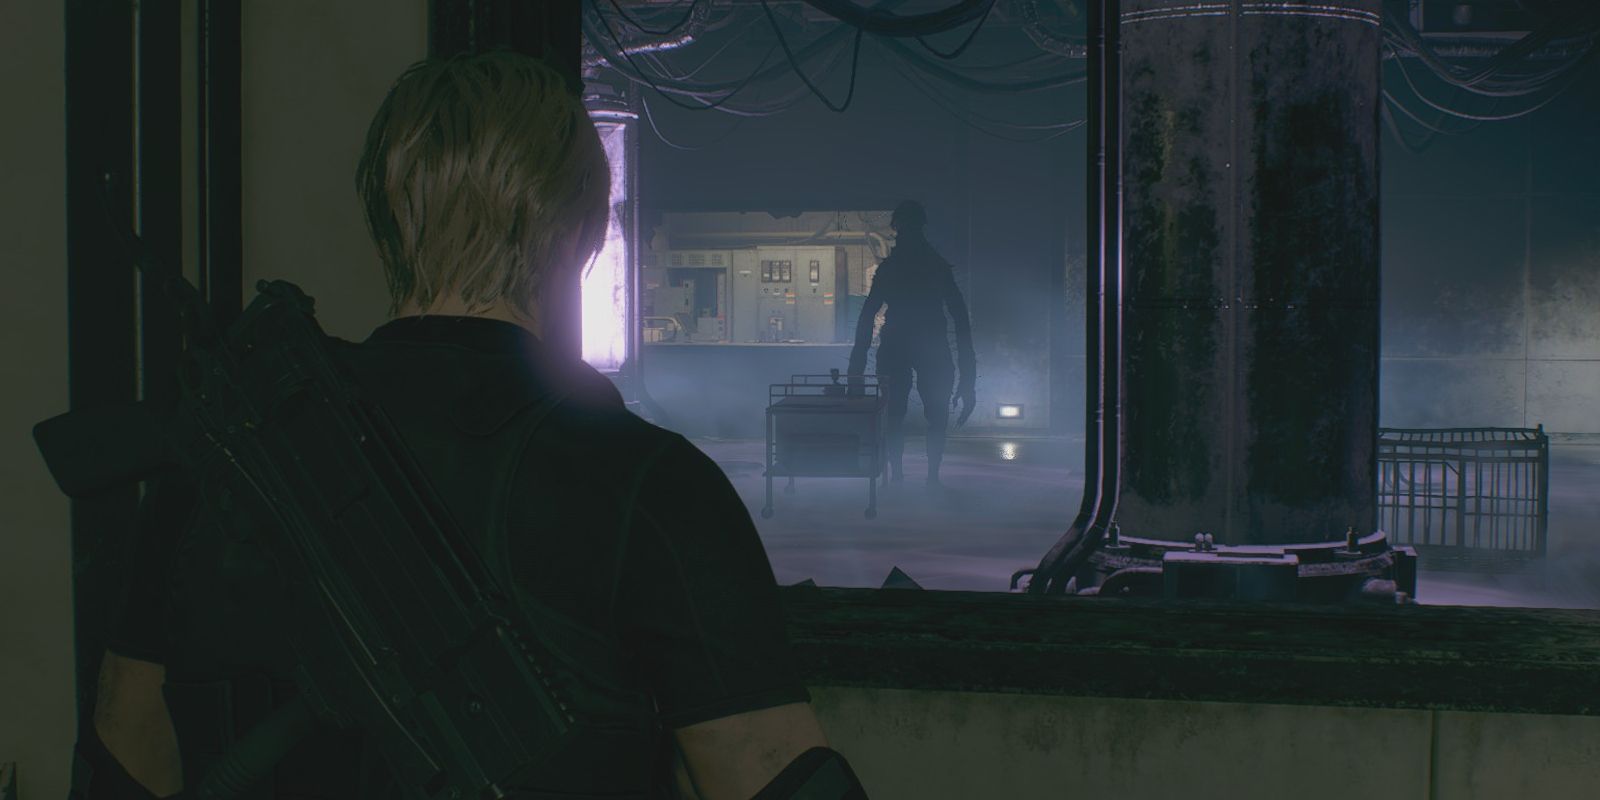 Leon looks through a window at a tall, shadowy humanoid figure in the remake of Resident Evil 4